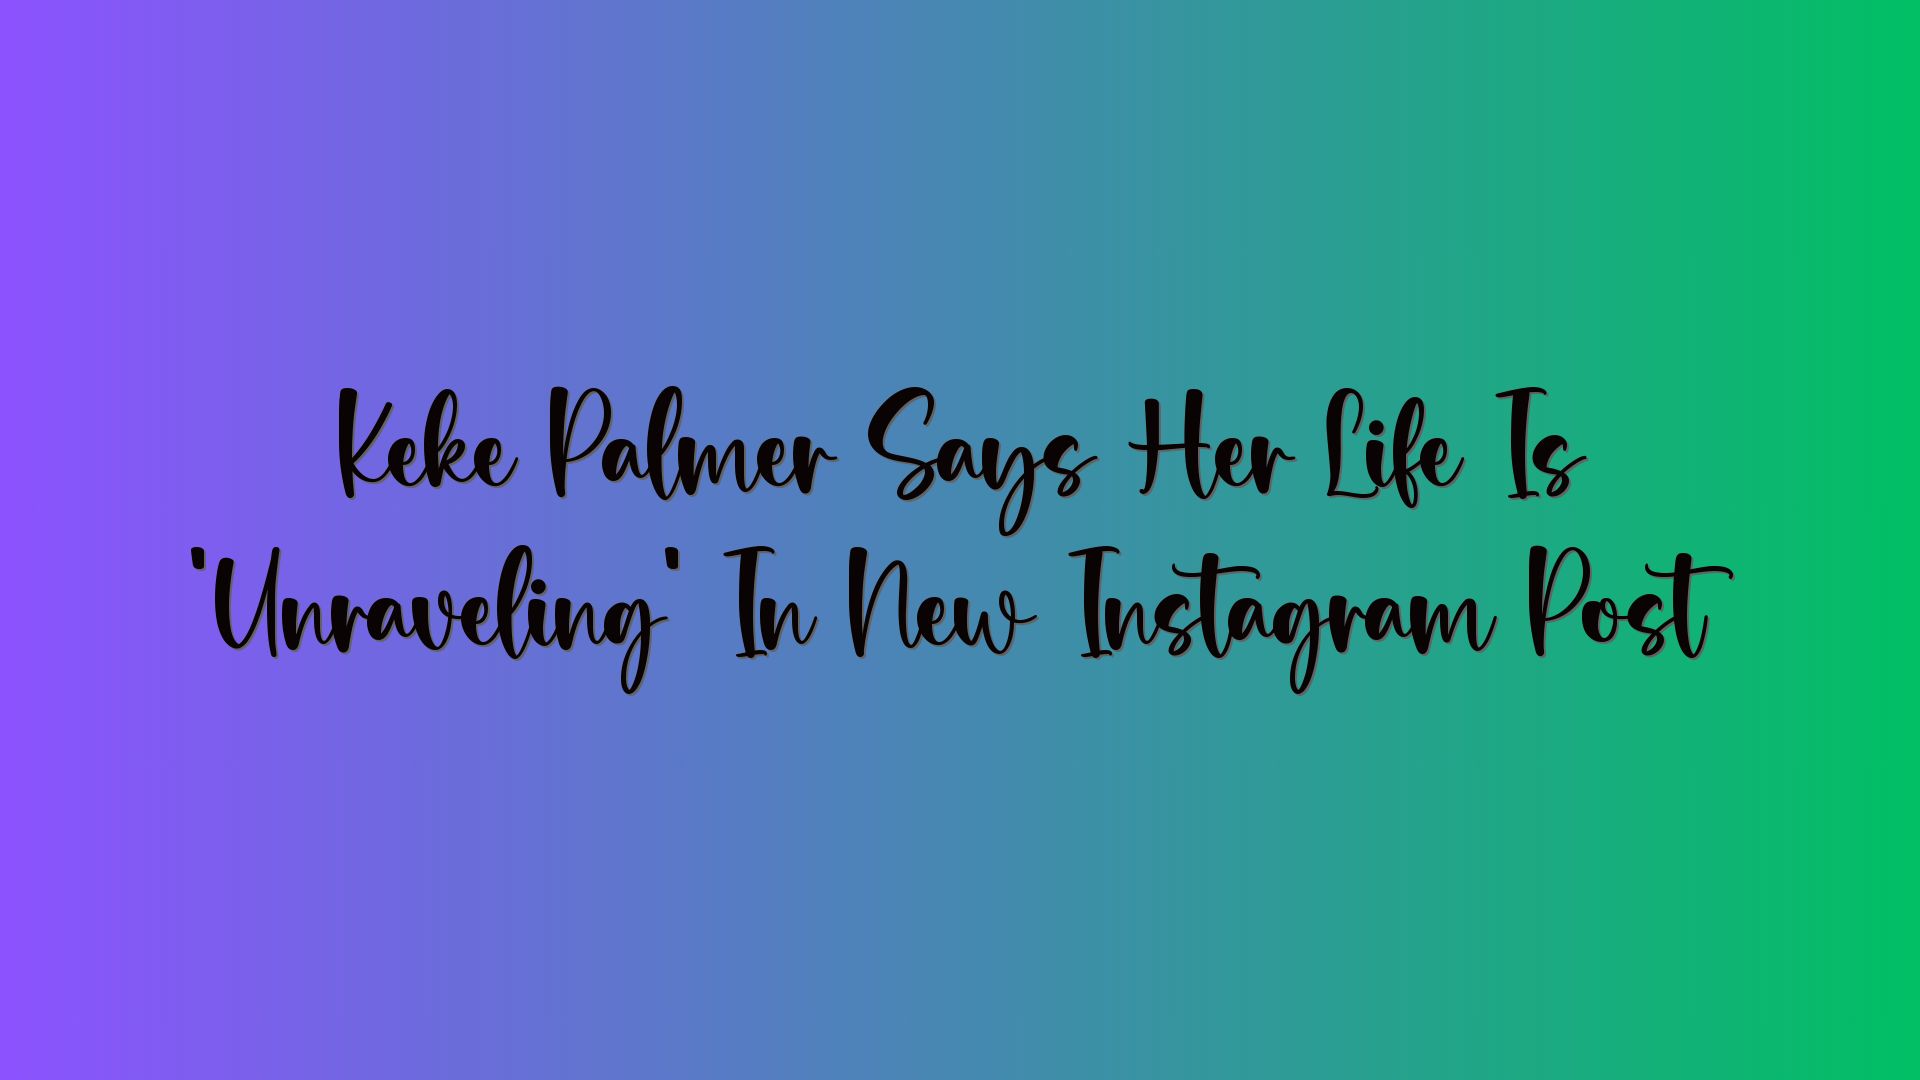 Keke Palmer Says Her Life Is ‘Unraveling’ In New Instagram Post